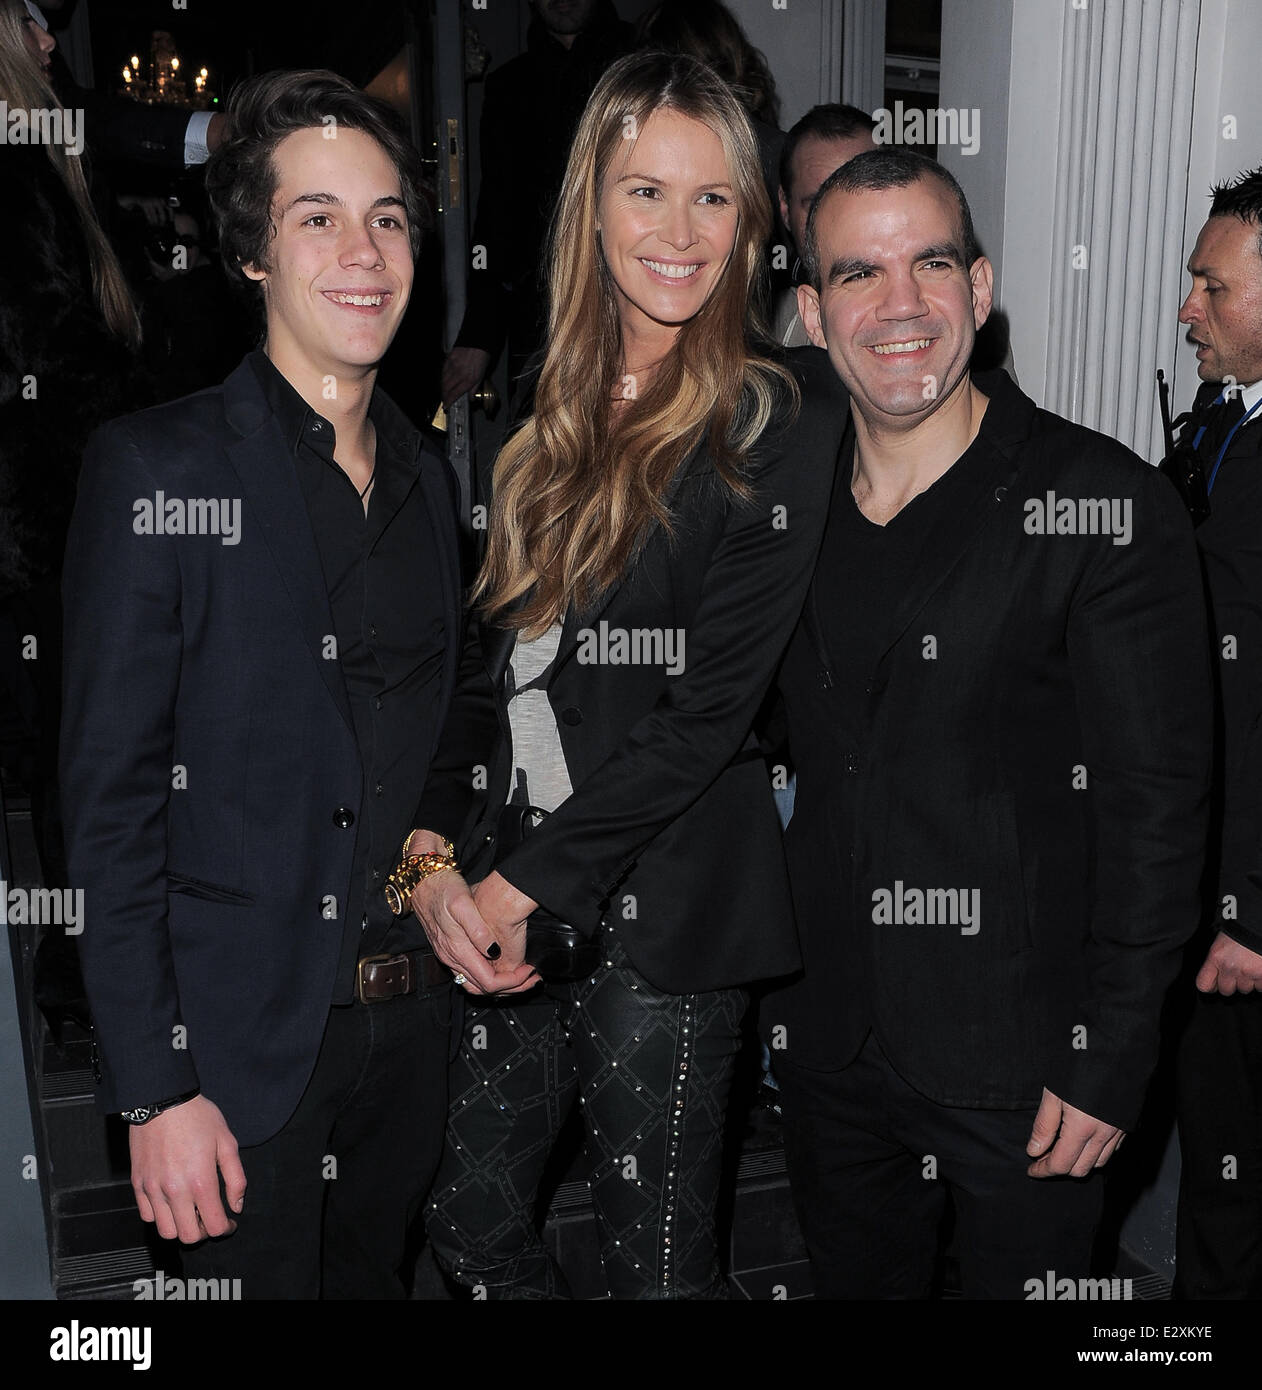 Elle Macpherson with her son Arpad Busson at The Right To Play private dinner for Barry the Dog fitness trainer ahead of his husky expedition across the Arctic  Featuring: Elle Macpherson,Arpad Busson,Barry the Dog Jogger Where: London, United Kingdom Whe Stock Photo